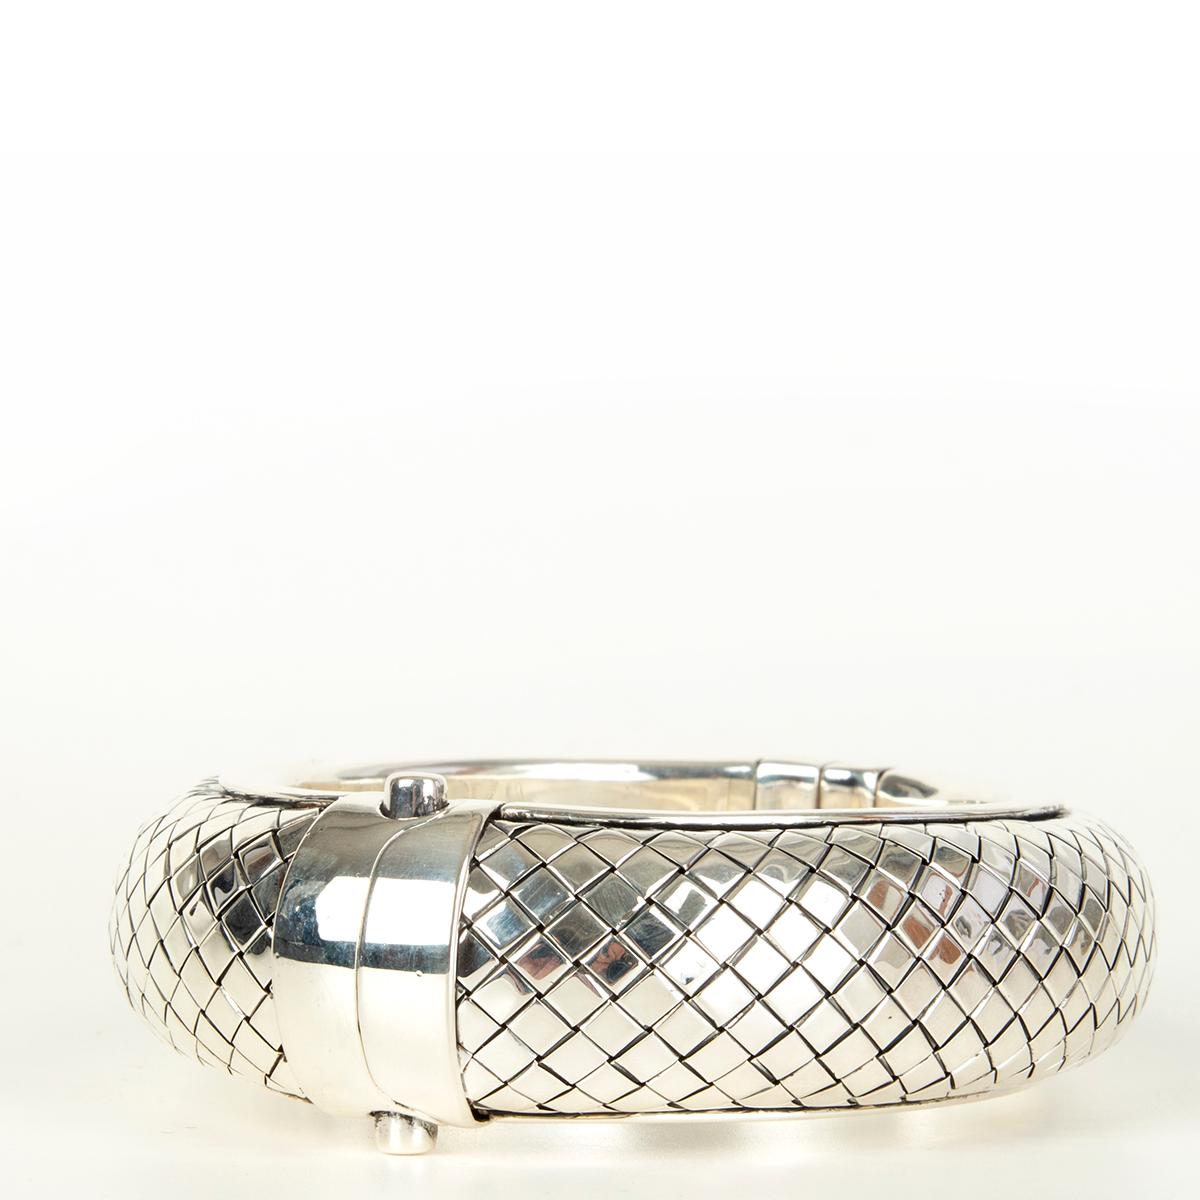 Bottega Veneta silver bracelet handmade using the label's signature Intrecciato techniques. Opens with a push clasp fastening. Has been worn and is in excellent condition. Comes with dust bag and box. 

Tag Size M 
Circumference 19cm